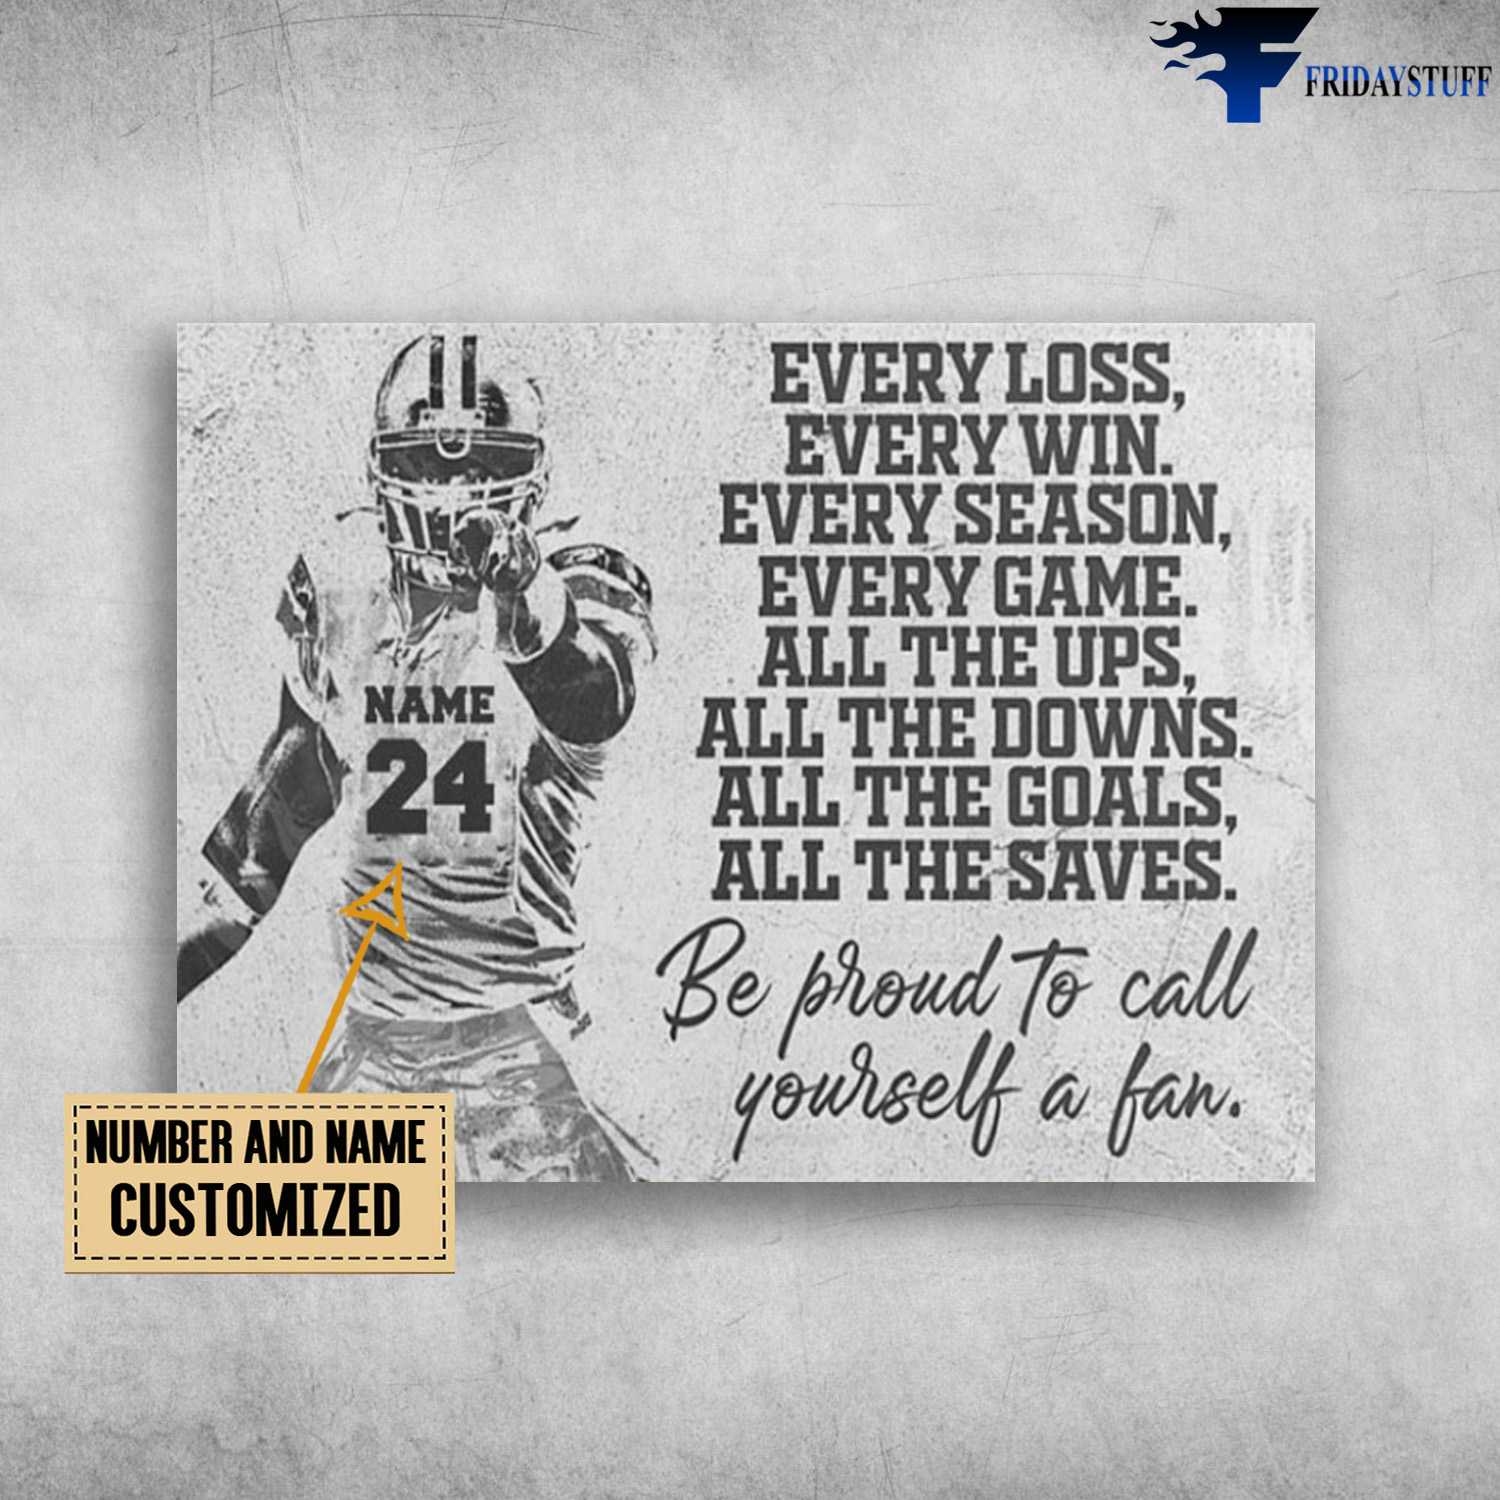 Football Player, Every Loss, Every Win, Every Season, Every Game, All The Ups, All The Downs